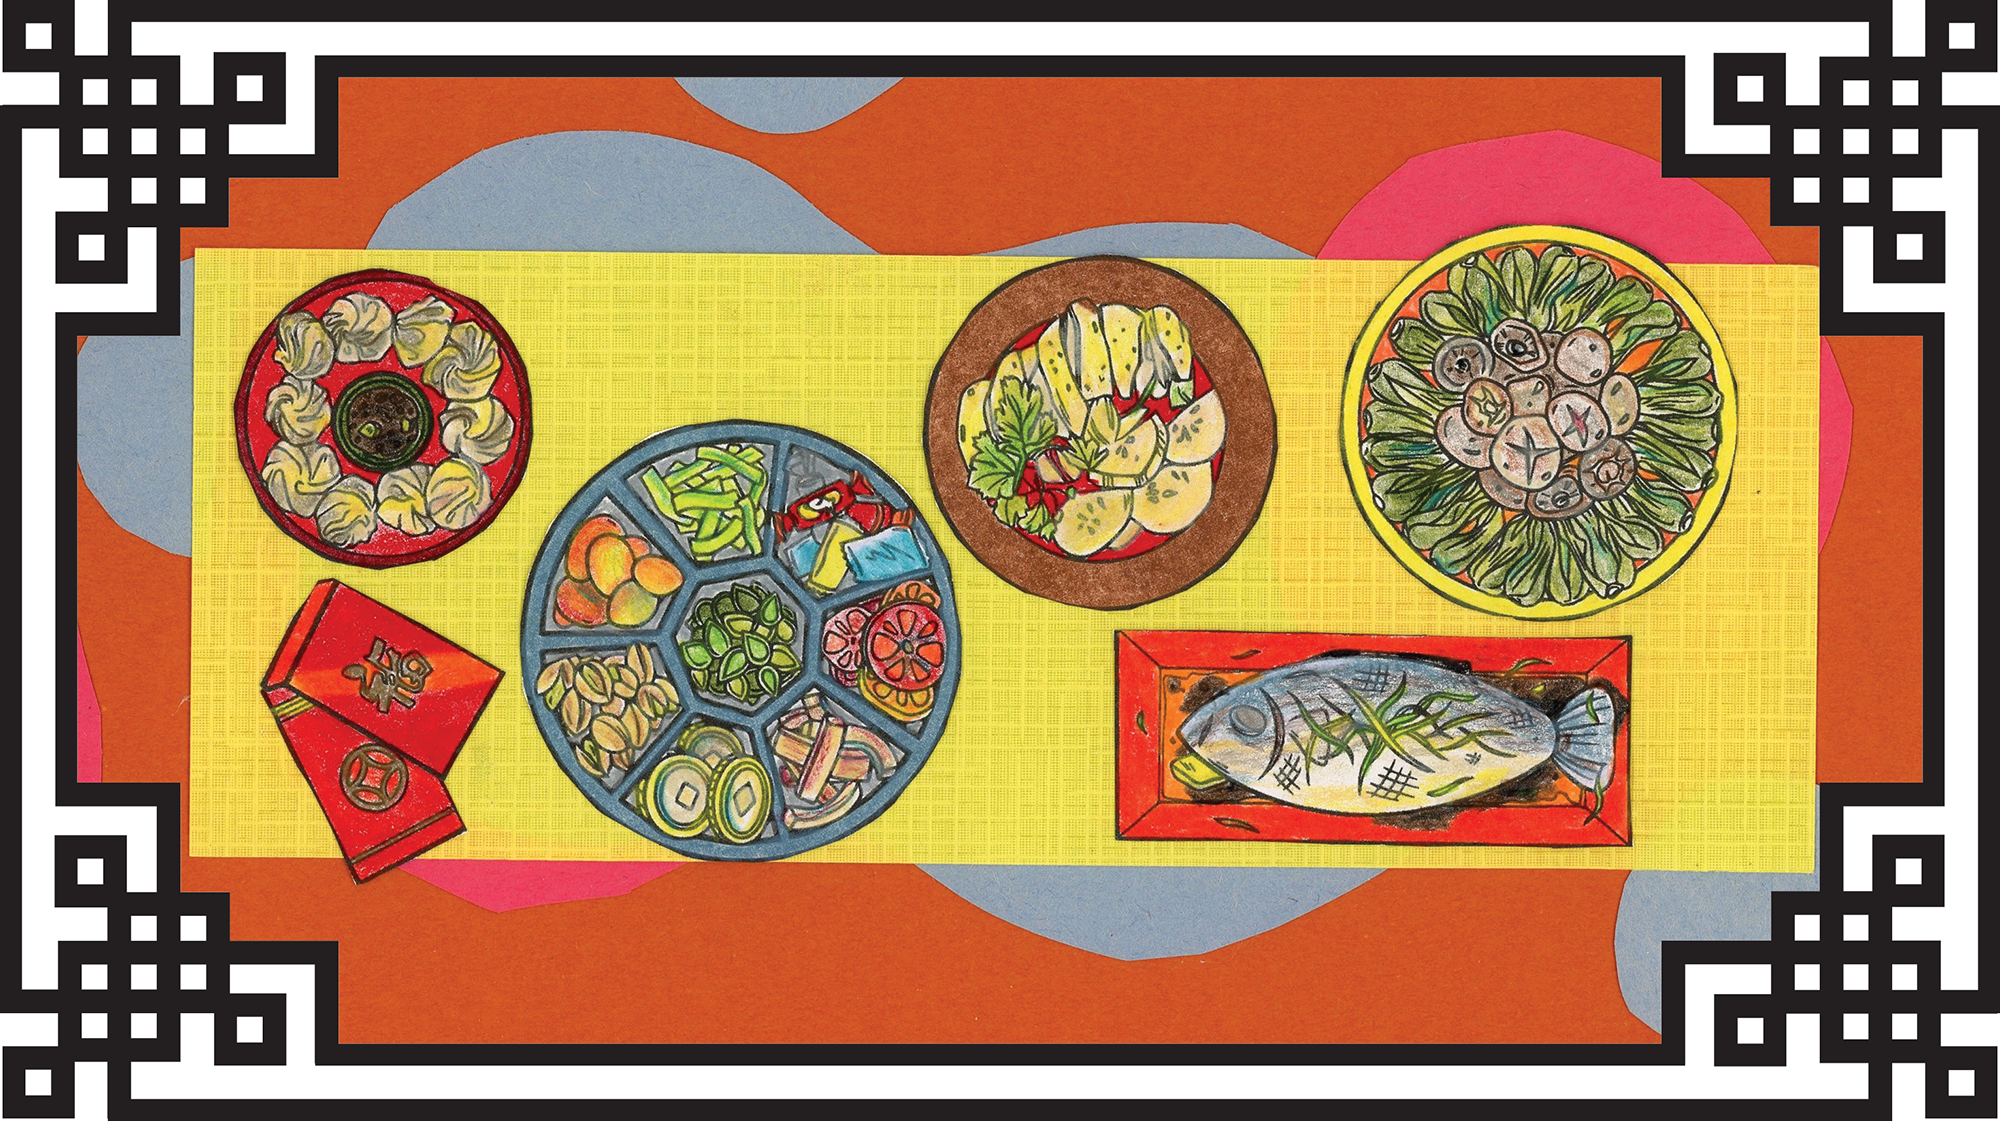 Landscape Yue Moon artwork of a dinner table with Chinese dishes with abstract shapes in yellow, blue and orange. It has a traditional Chinese black & white border around it.